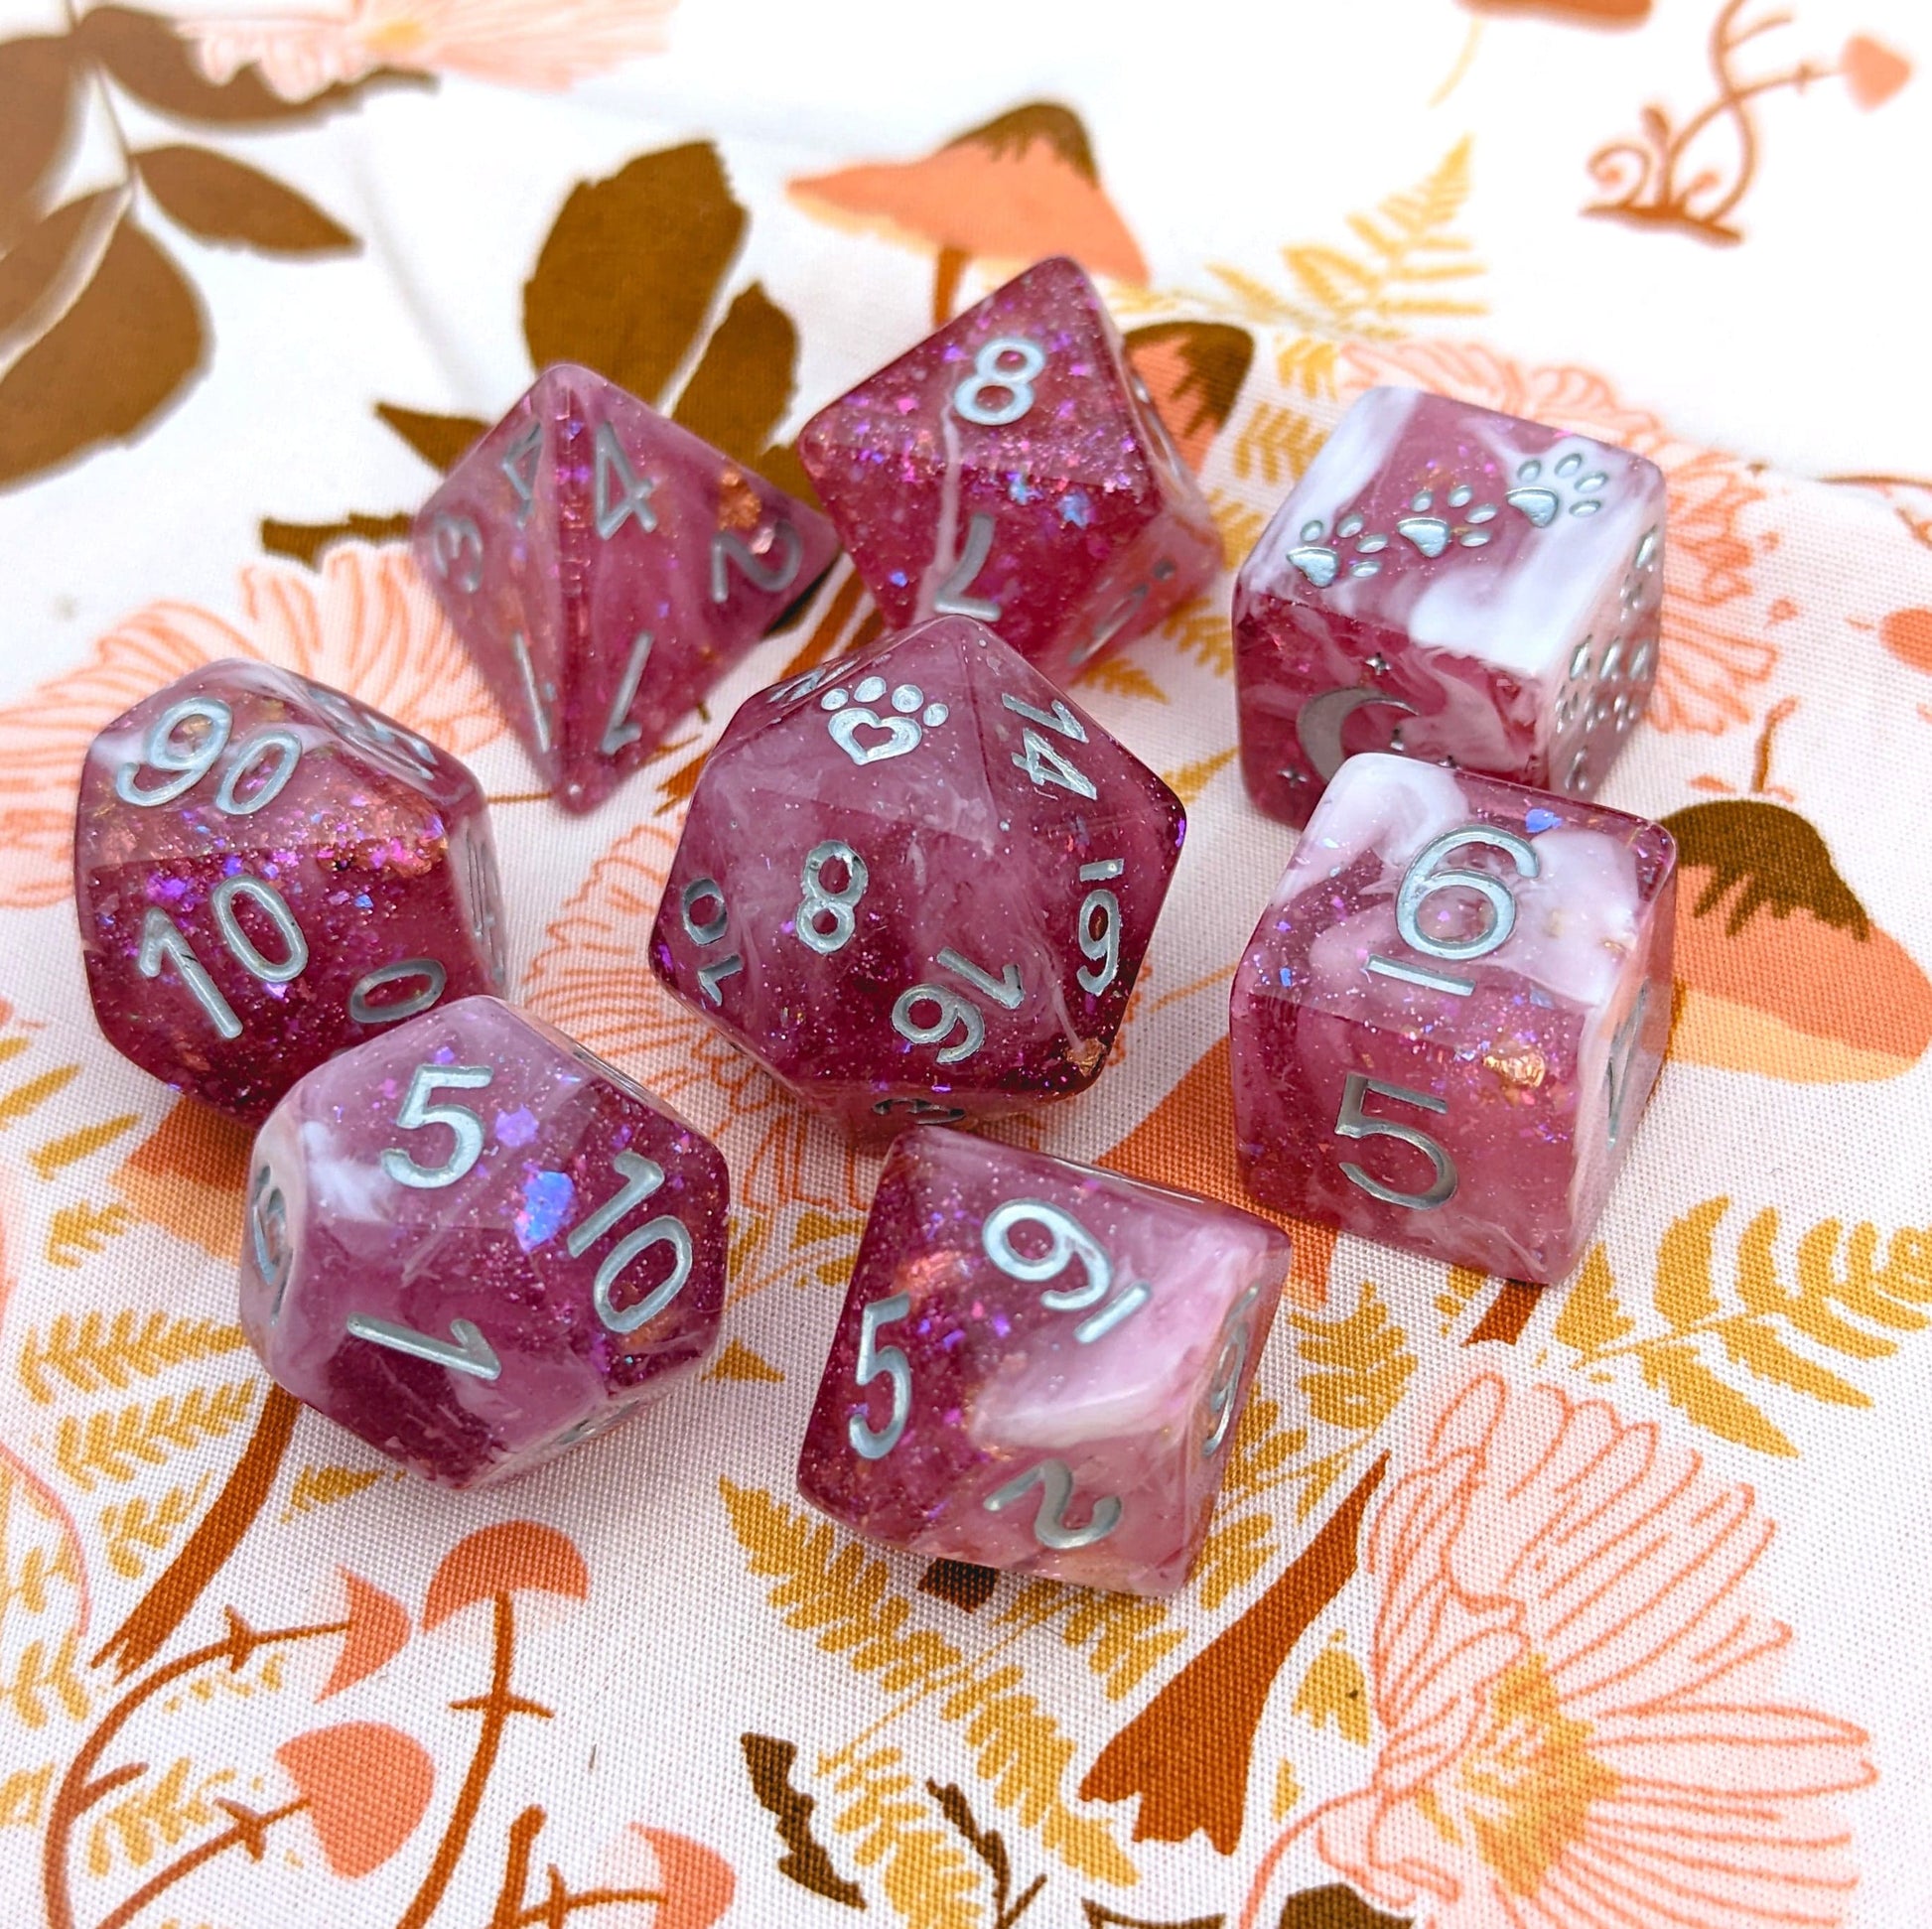 Berry Wine 8 Piece Dice Set. Clear Burgundy and White Marble, with Glitter and Foil